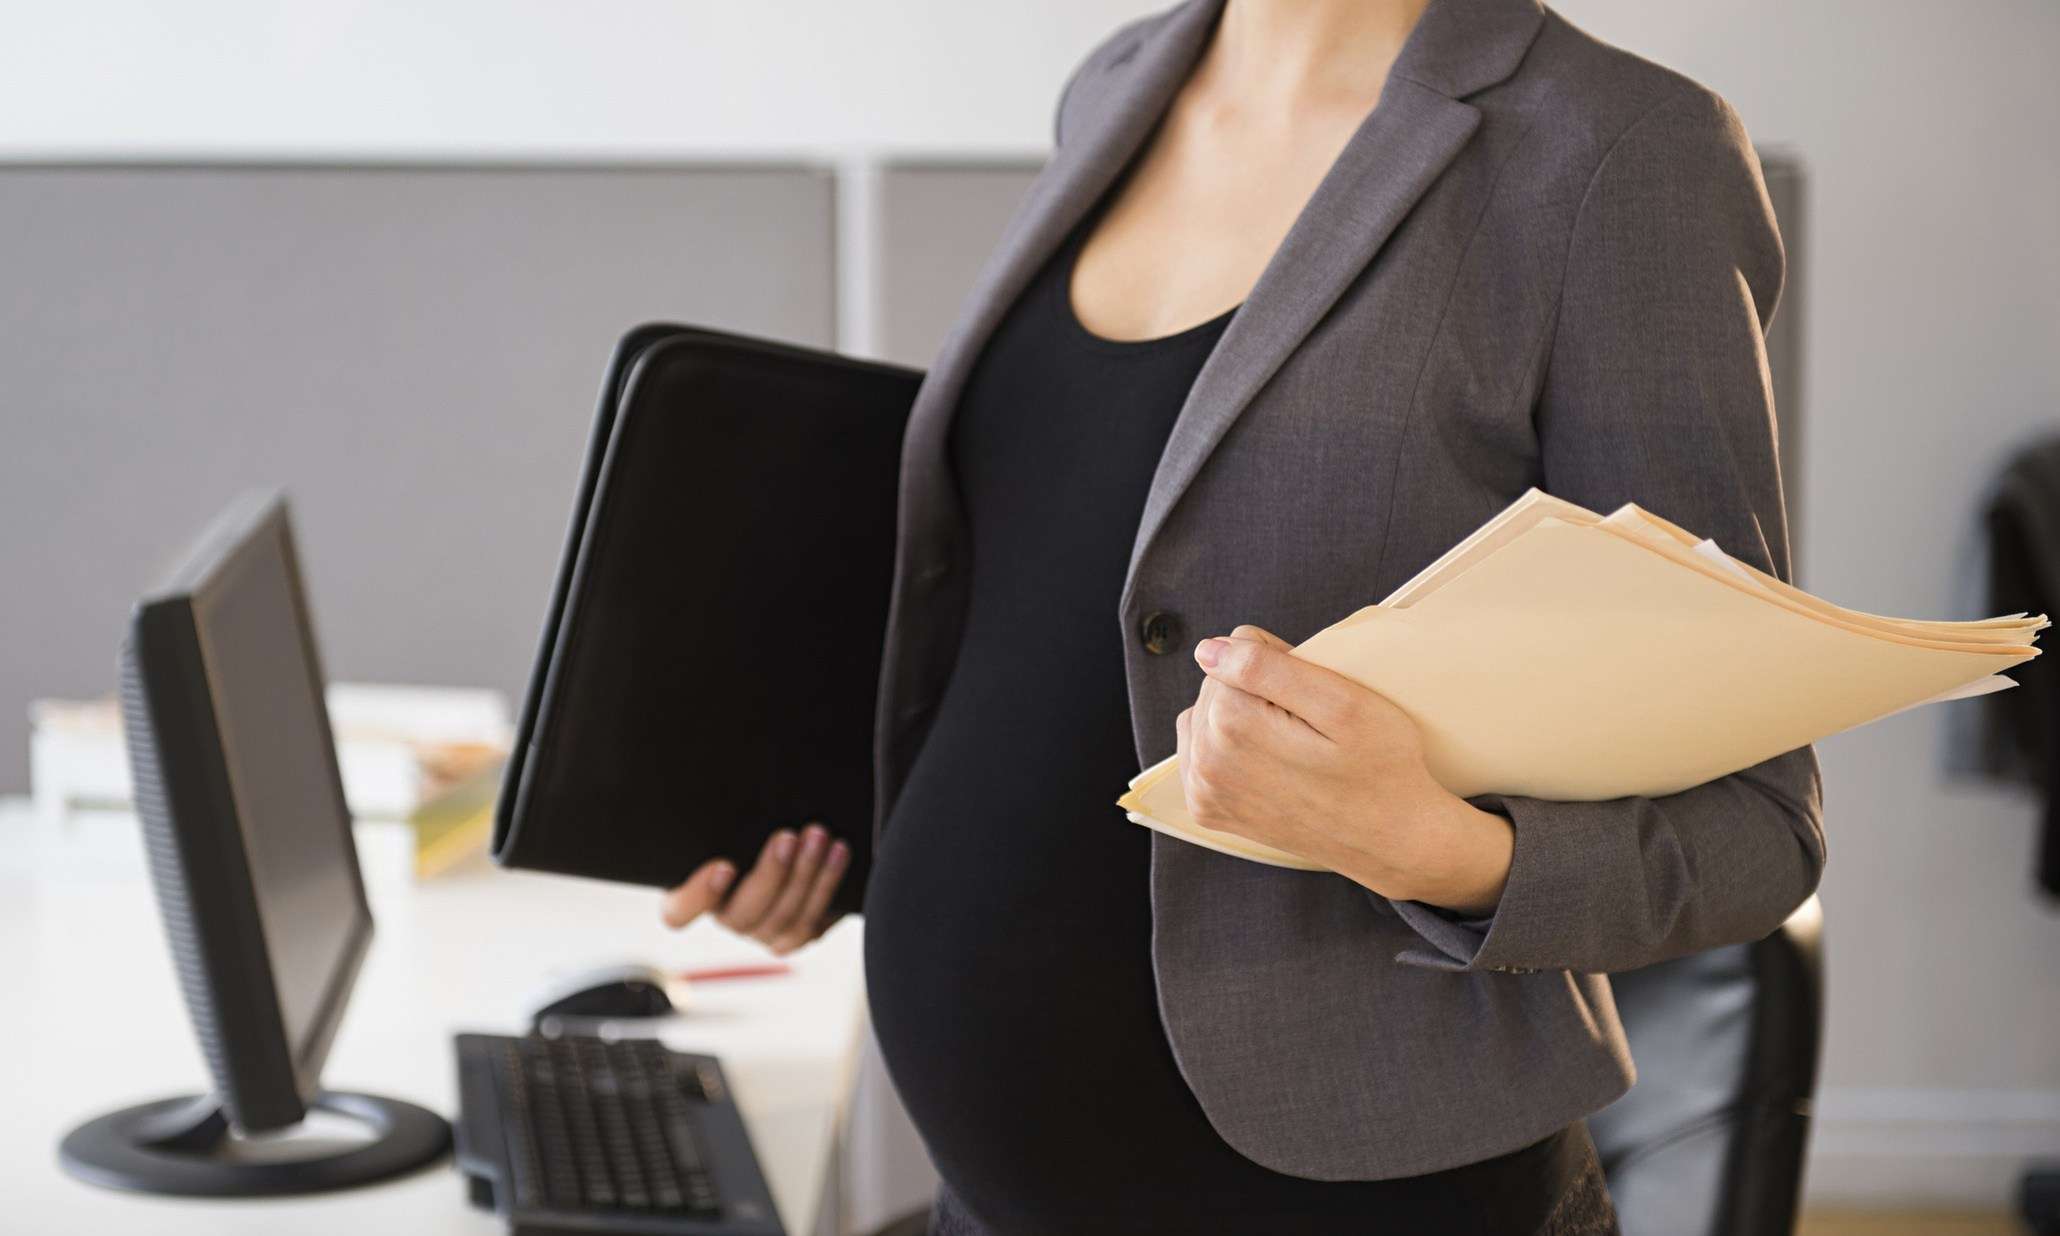 Let’s Talk : Pregnancy and office environment